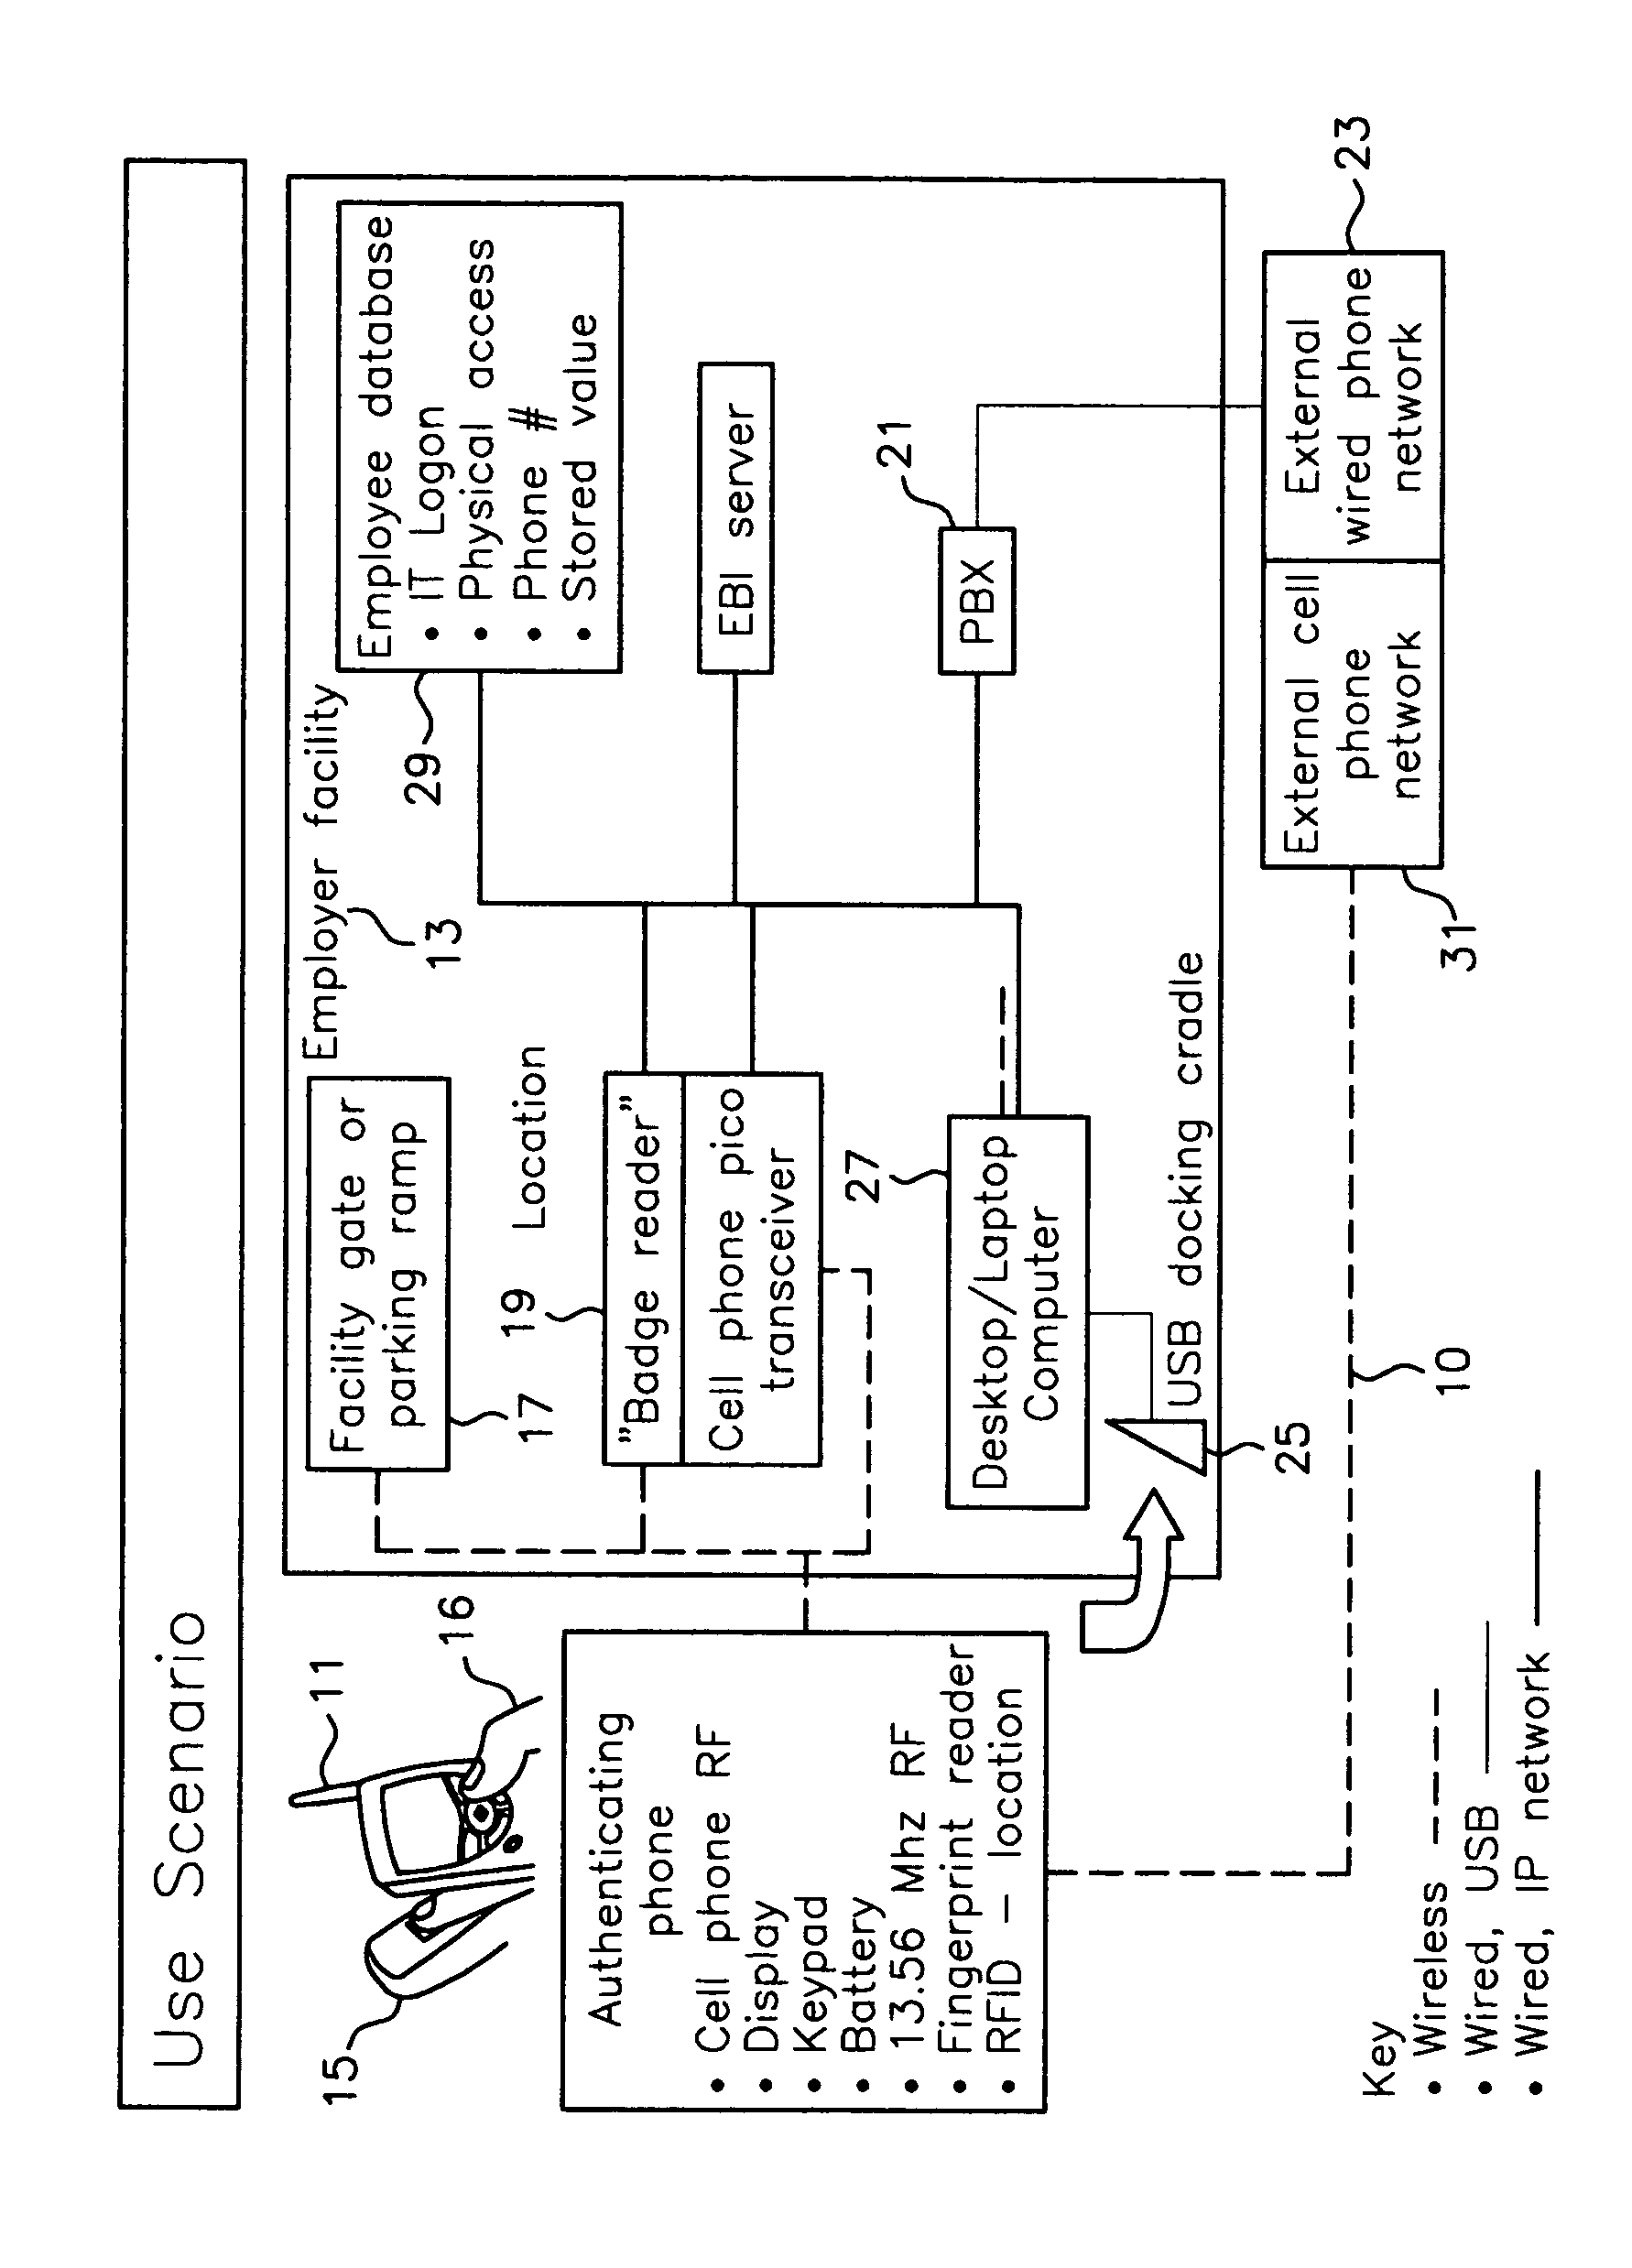 Authenticating wireless phone system